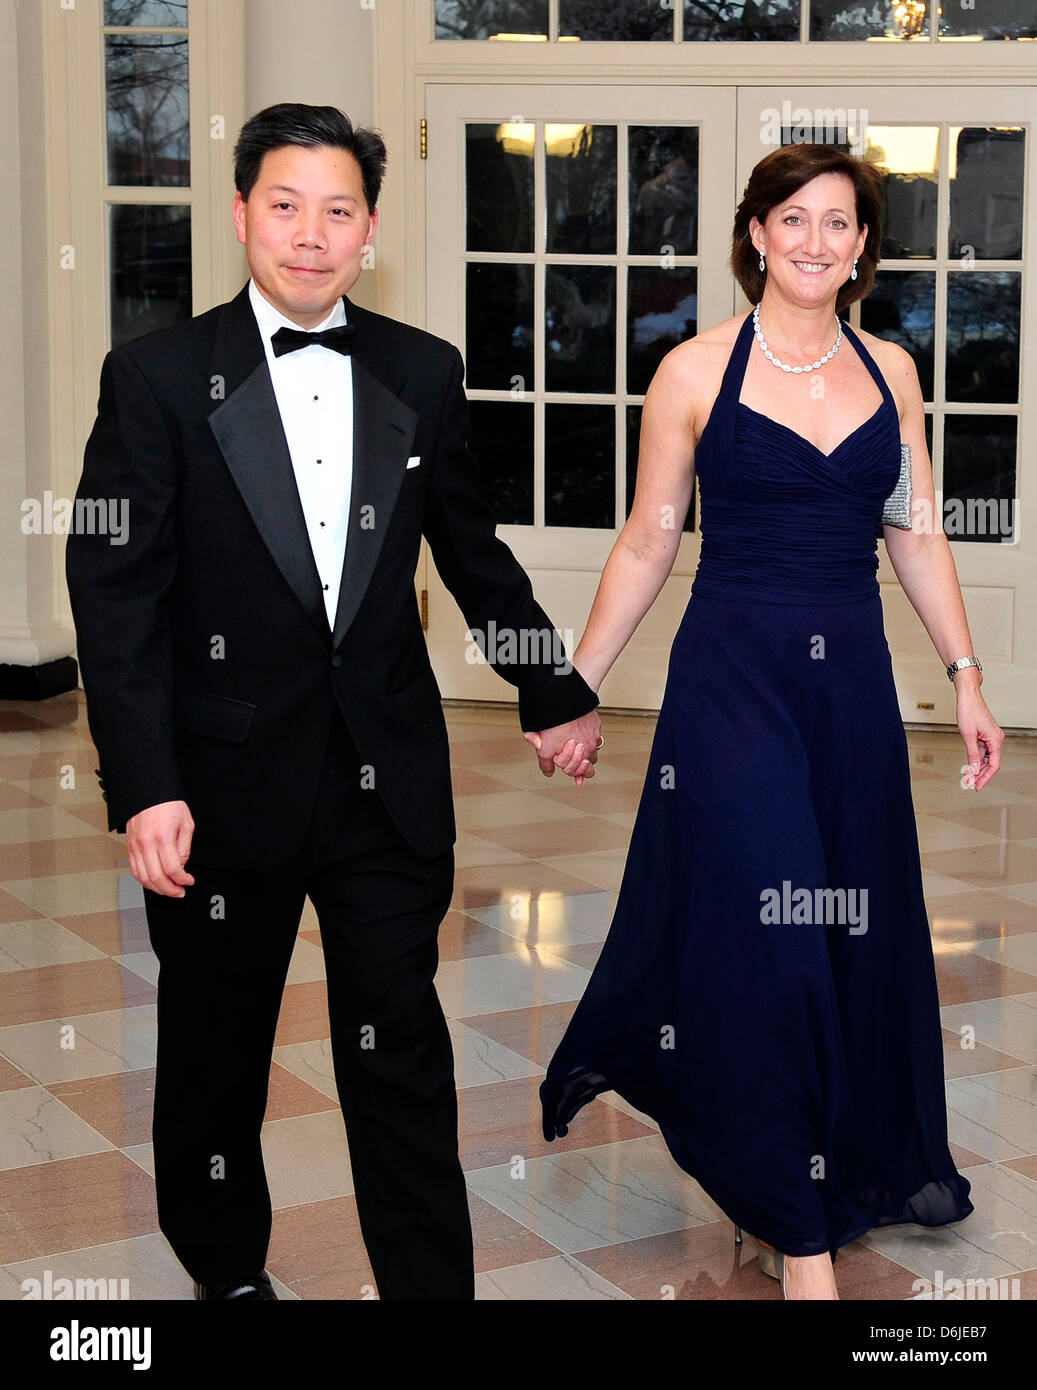 Chris Lu, Assistant to the President and Cabinet Secretary, and Katie Thomson arrive for the Official Dinner in honor of Prime Minister David Cameron of Great Britain and his wife, Samantha, at the White House in Washington, D.C. on Tuesday, March 14, 2012..Credit: Ron Sachs / CNP.(RESTRICTION: NO New York or New Jersey Newspapers or newspapers within a 75 mile radius of New York C Stock Photo